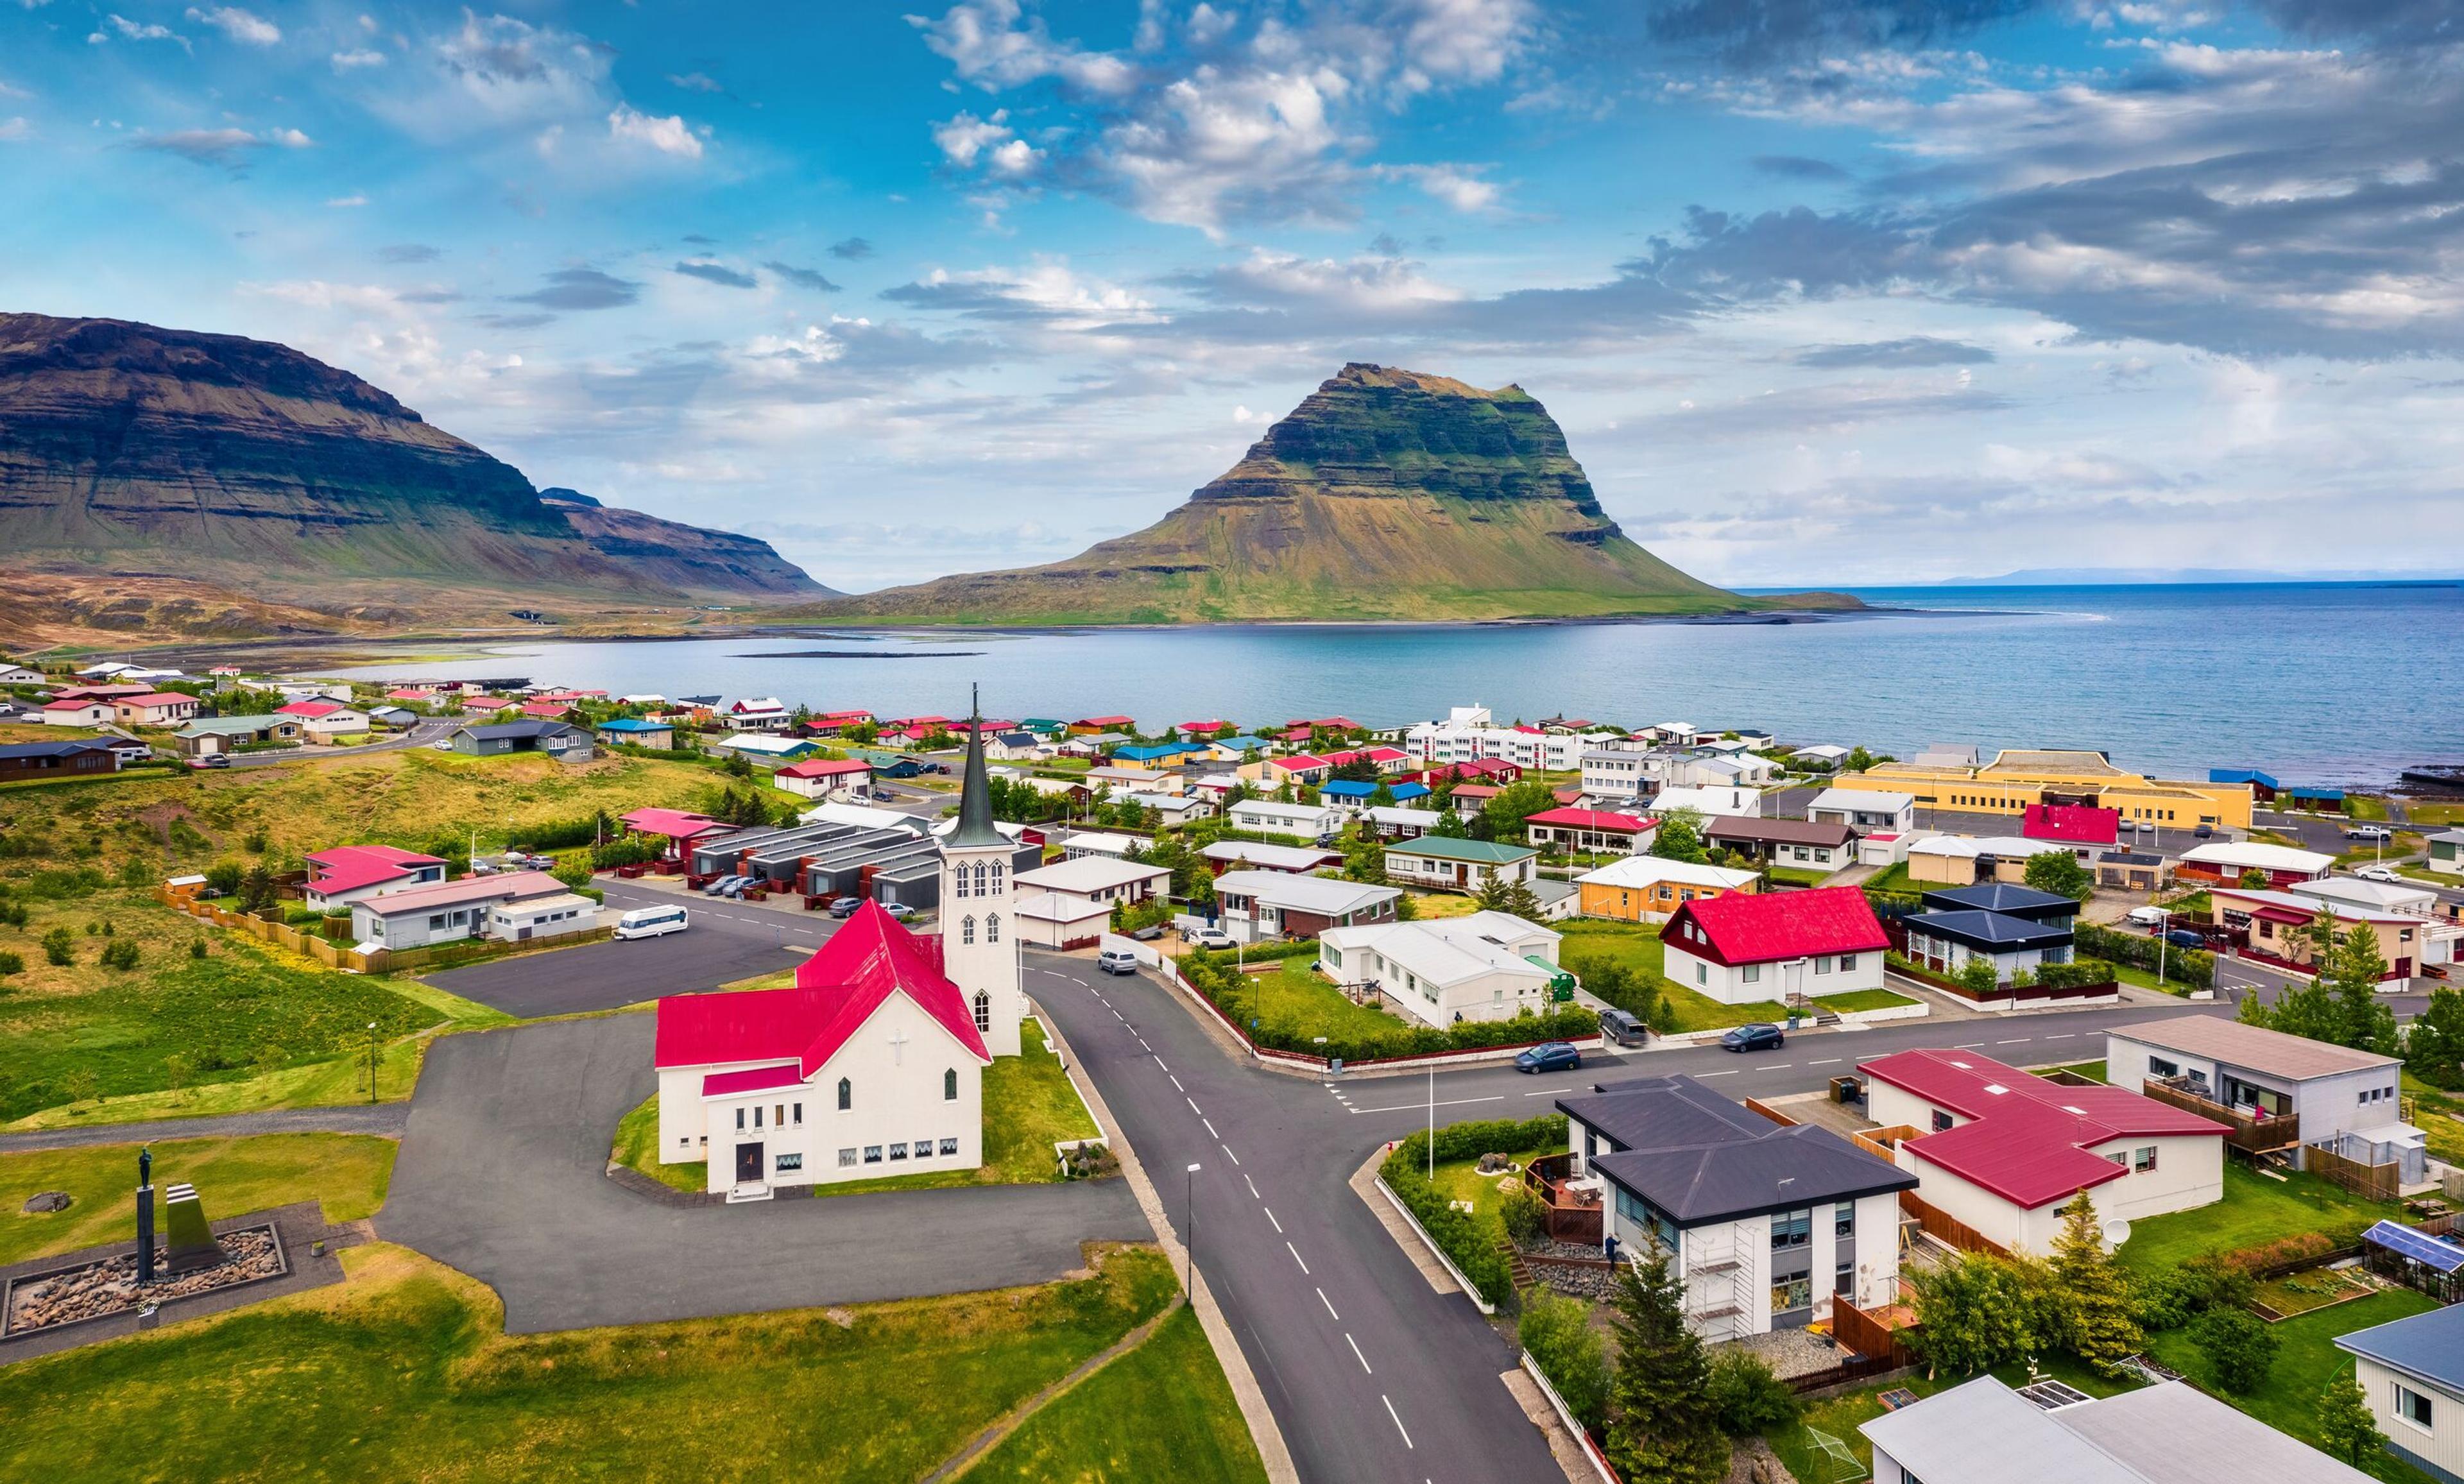 A quaint colorful village on a sunlit summer day, with the iconic Kirkjufell mountain and the shimmering sea framing the backdrop.